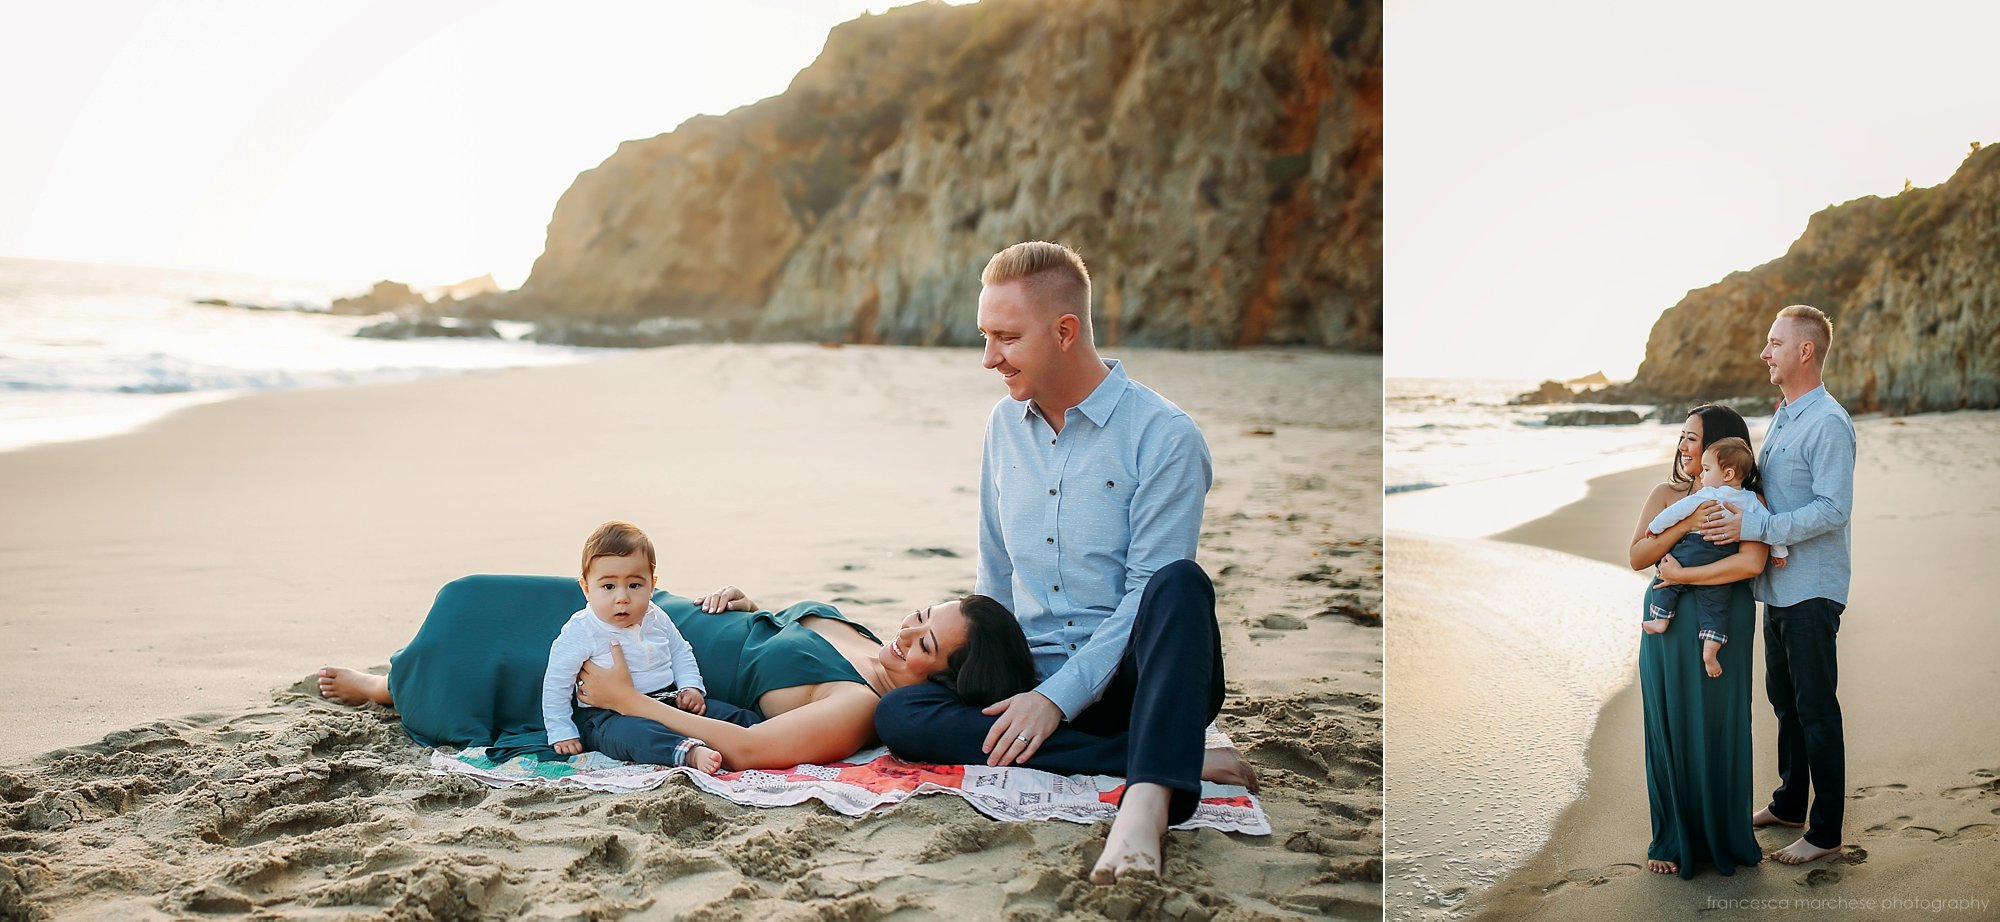 Family of three with small baby family photography session at the beach  - Francesca Marchese Photography Los Angeles & Orange County family photographer